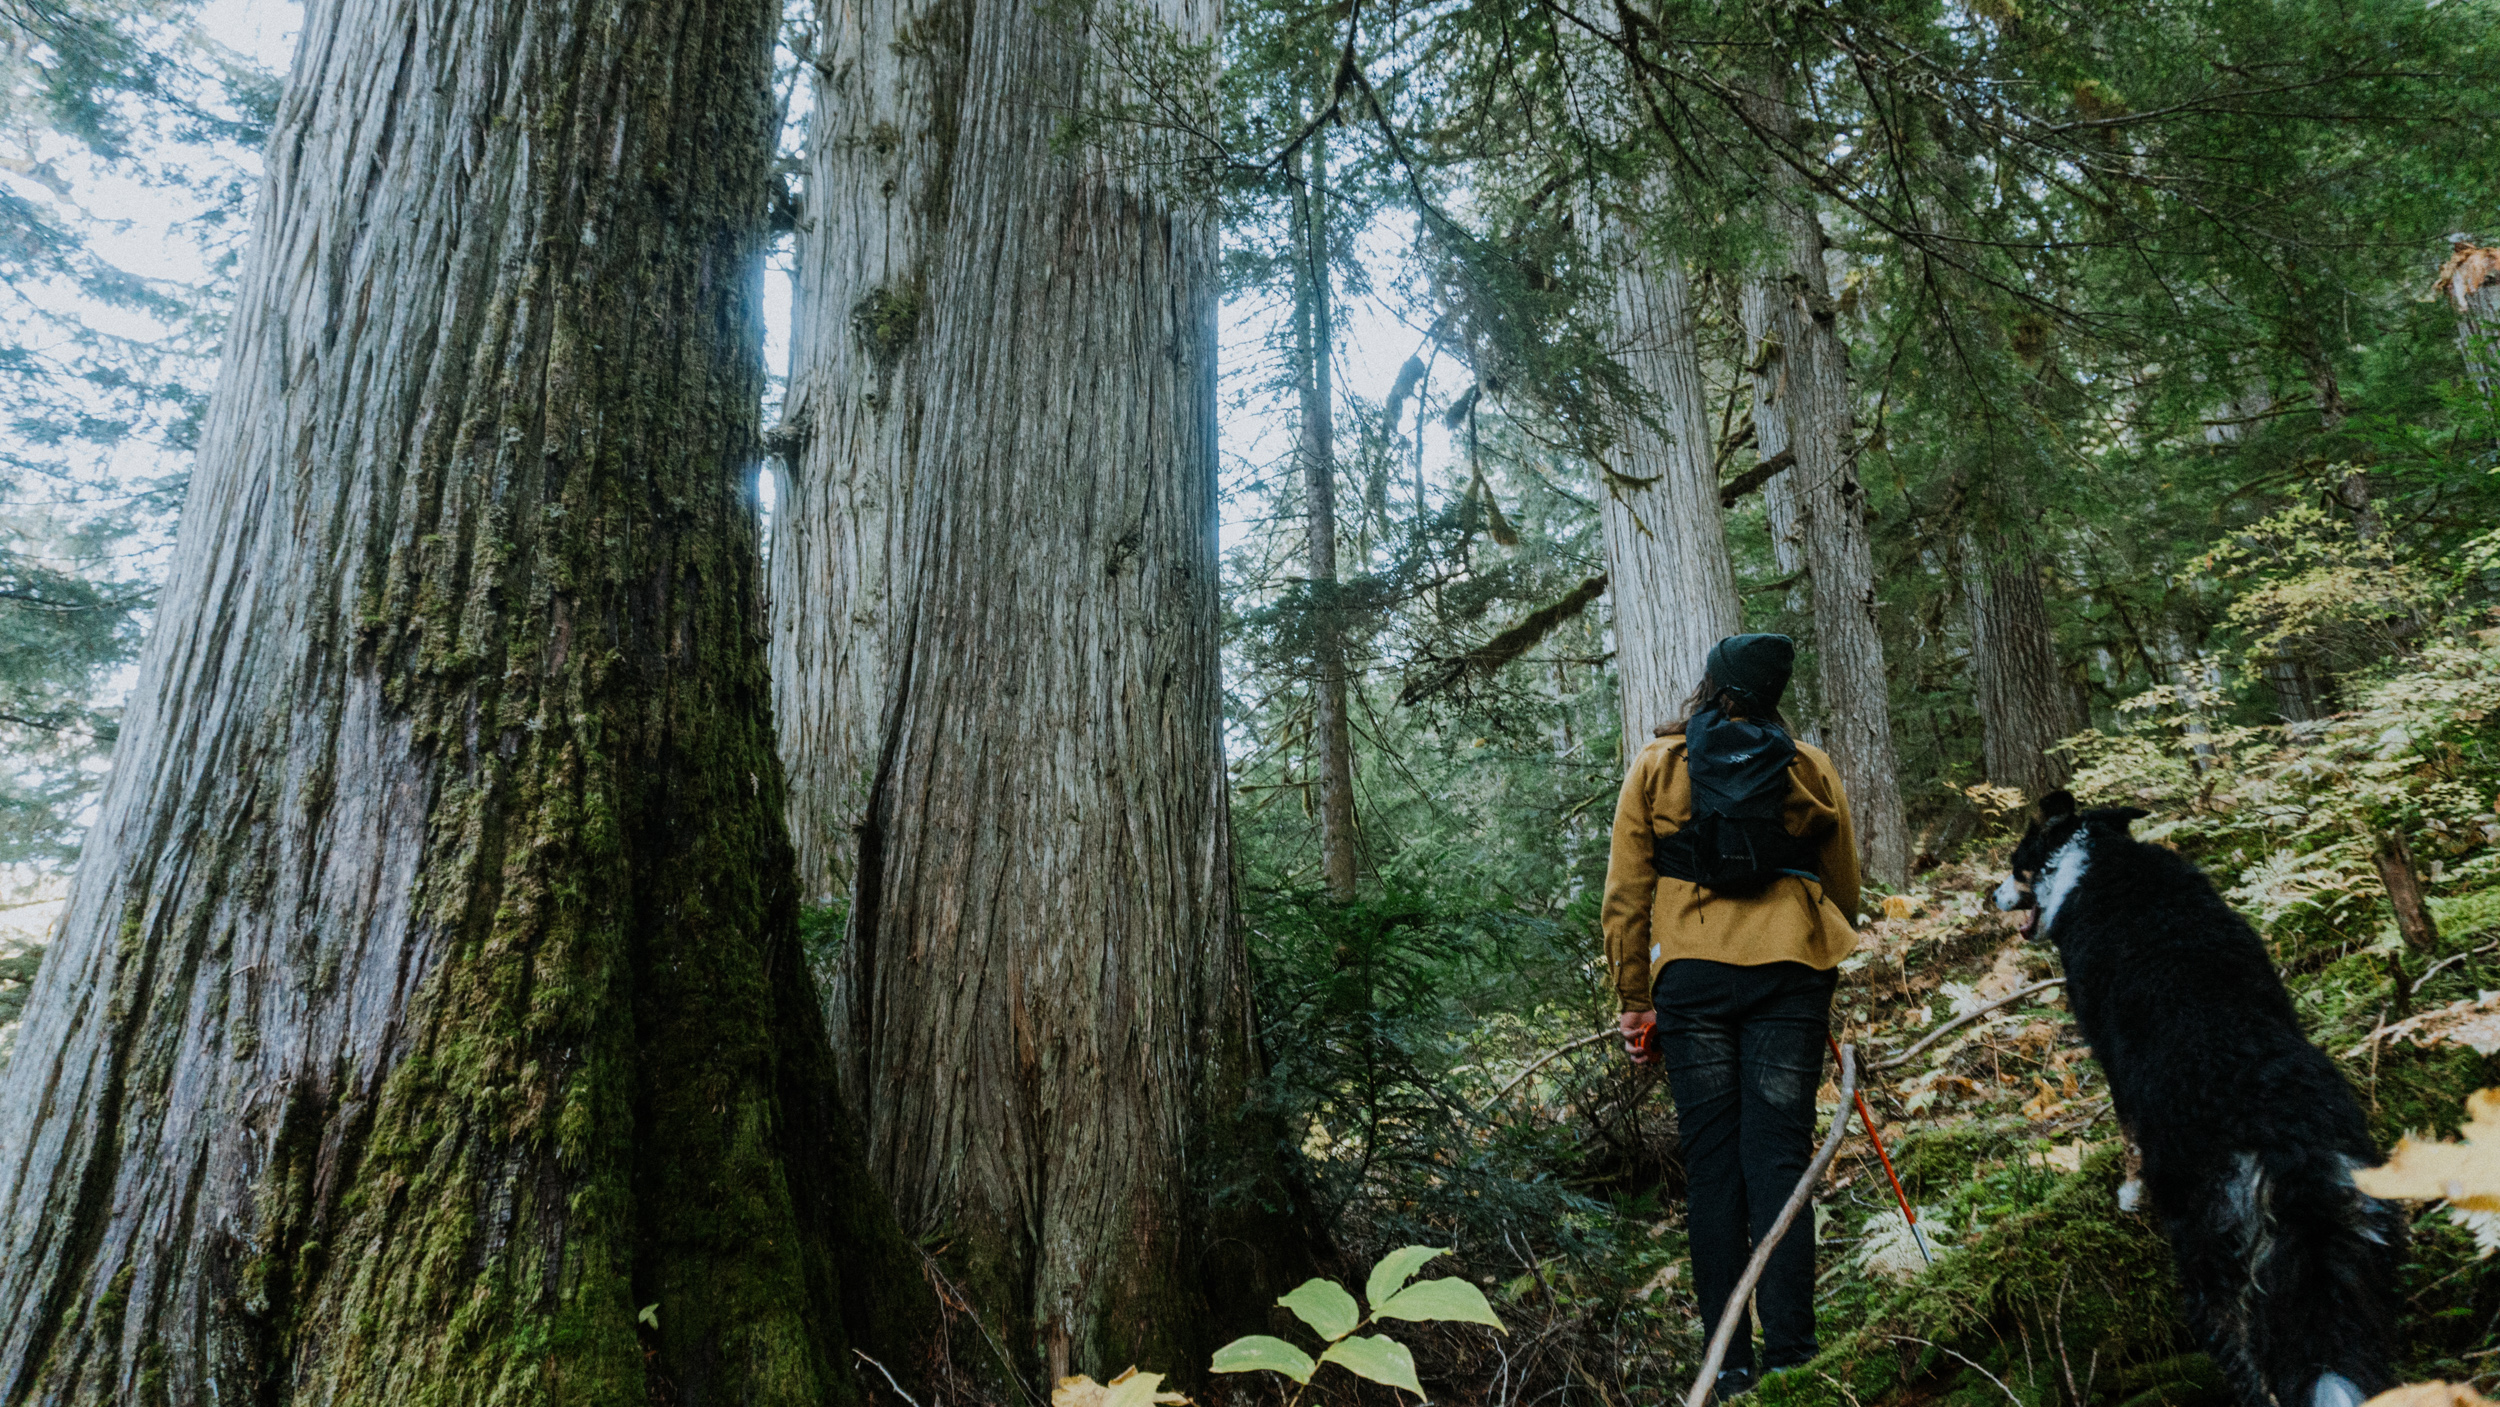 Wildsight conservation specialist Eddie Petryshen hikes through the rare inland temperate rainforest in the upper Seymour River watershed, north of Revelstoke, B.C, where there are lichens